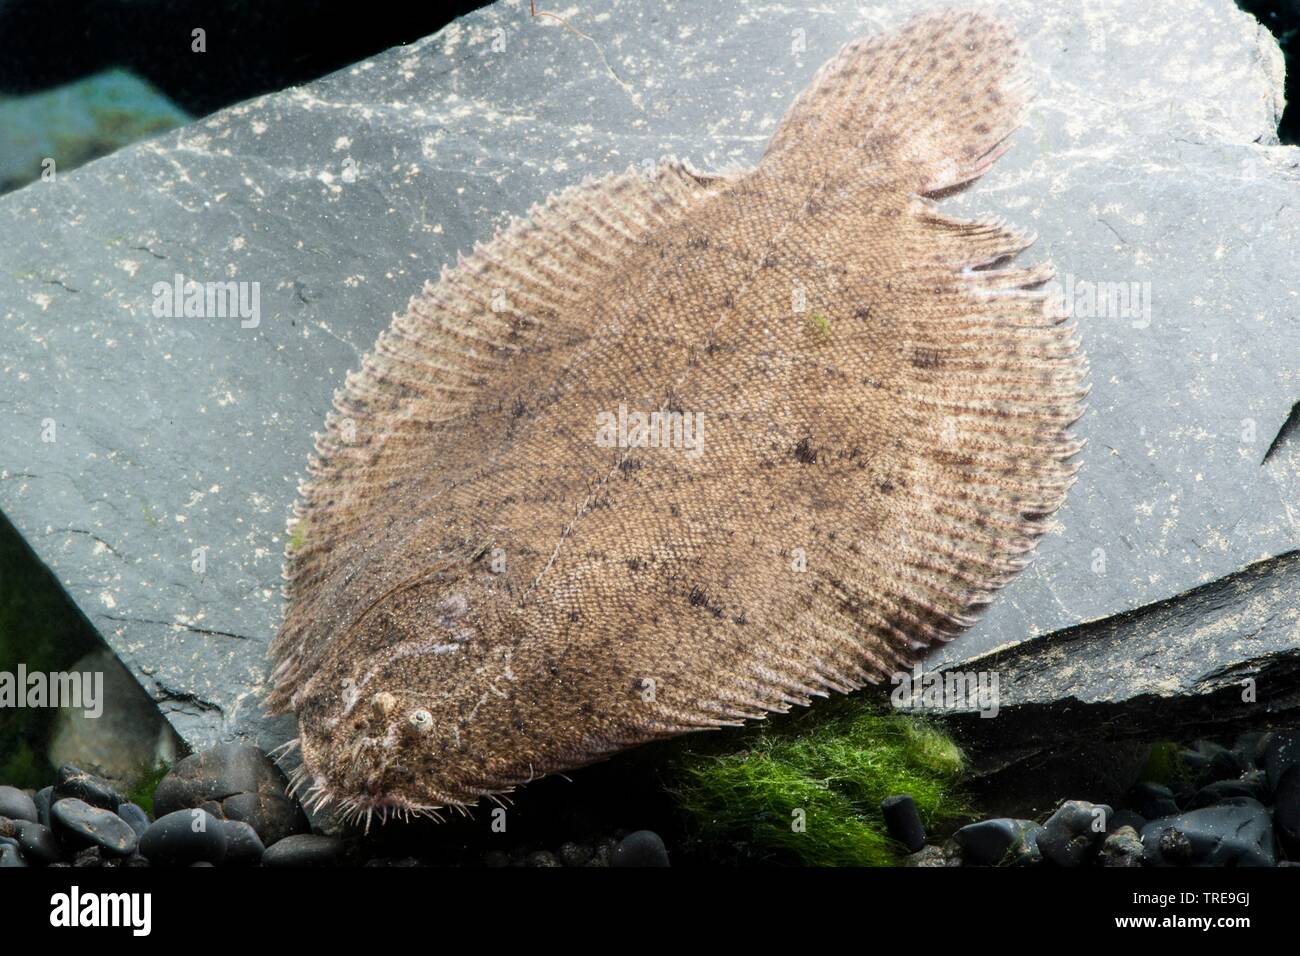 Peruvian Freshwater Sole (Hypoclinemus mentalis), lying on a stone Stock Photo